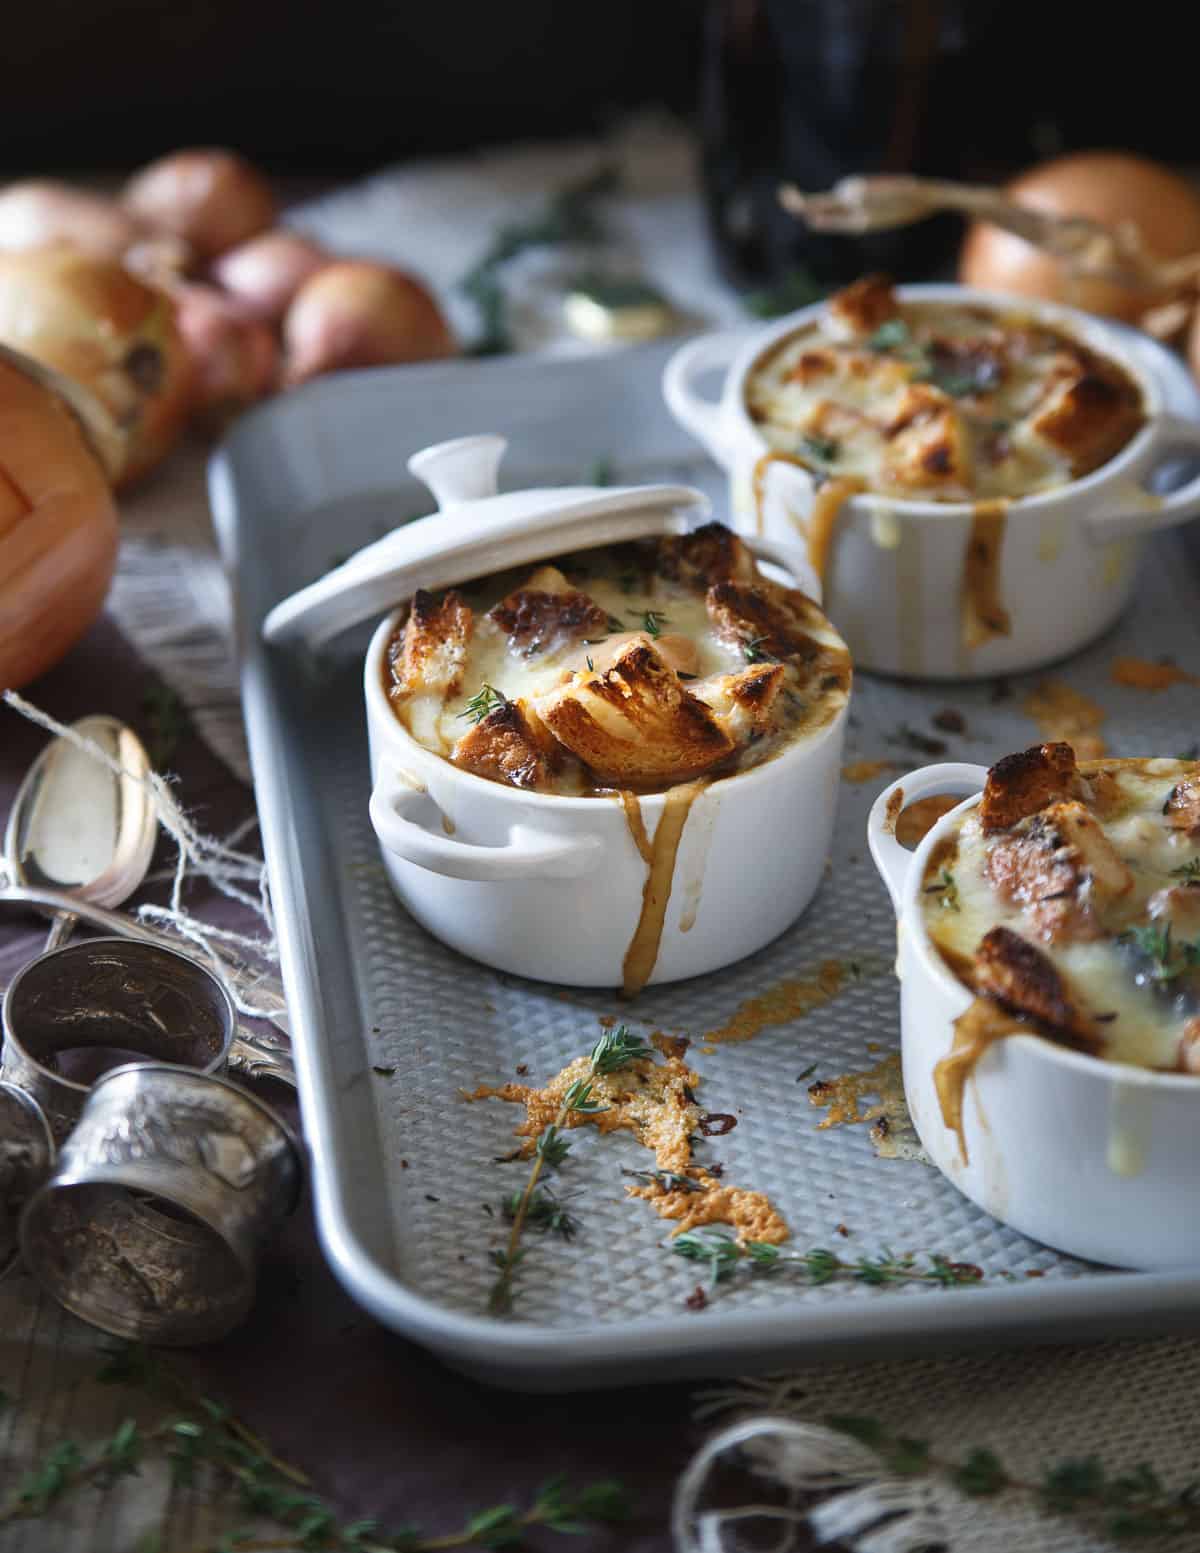 This gluten free Irish stout onion soup is made with buttery toasted thyme croutons and topped with plenty of Irish cheddar.